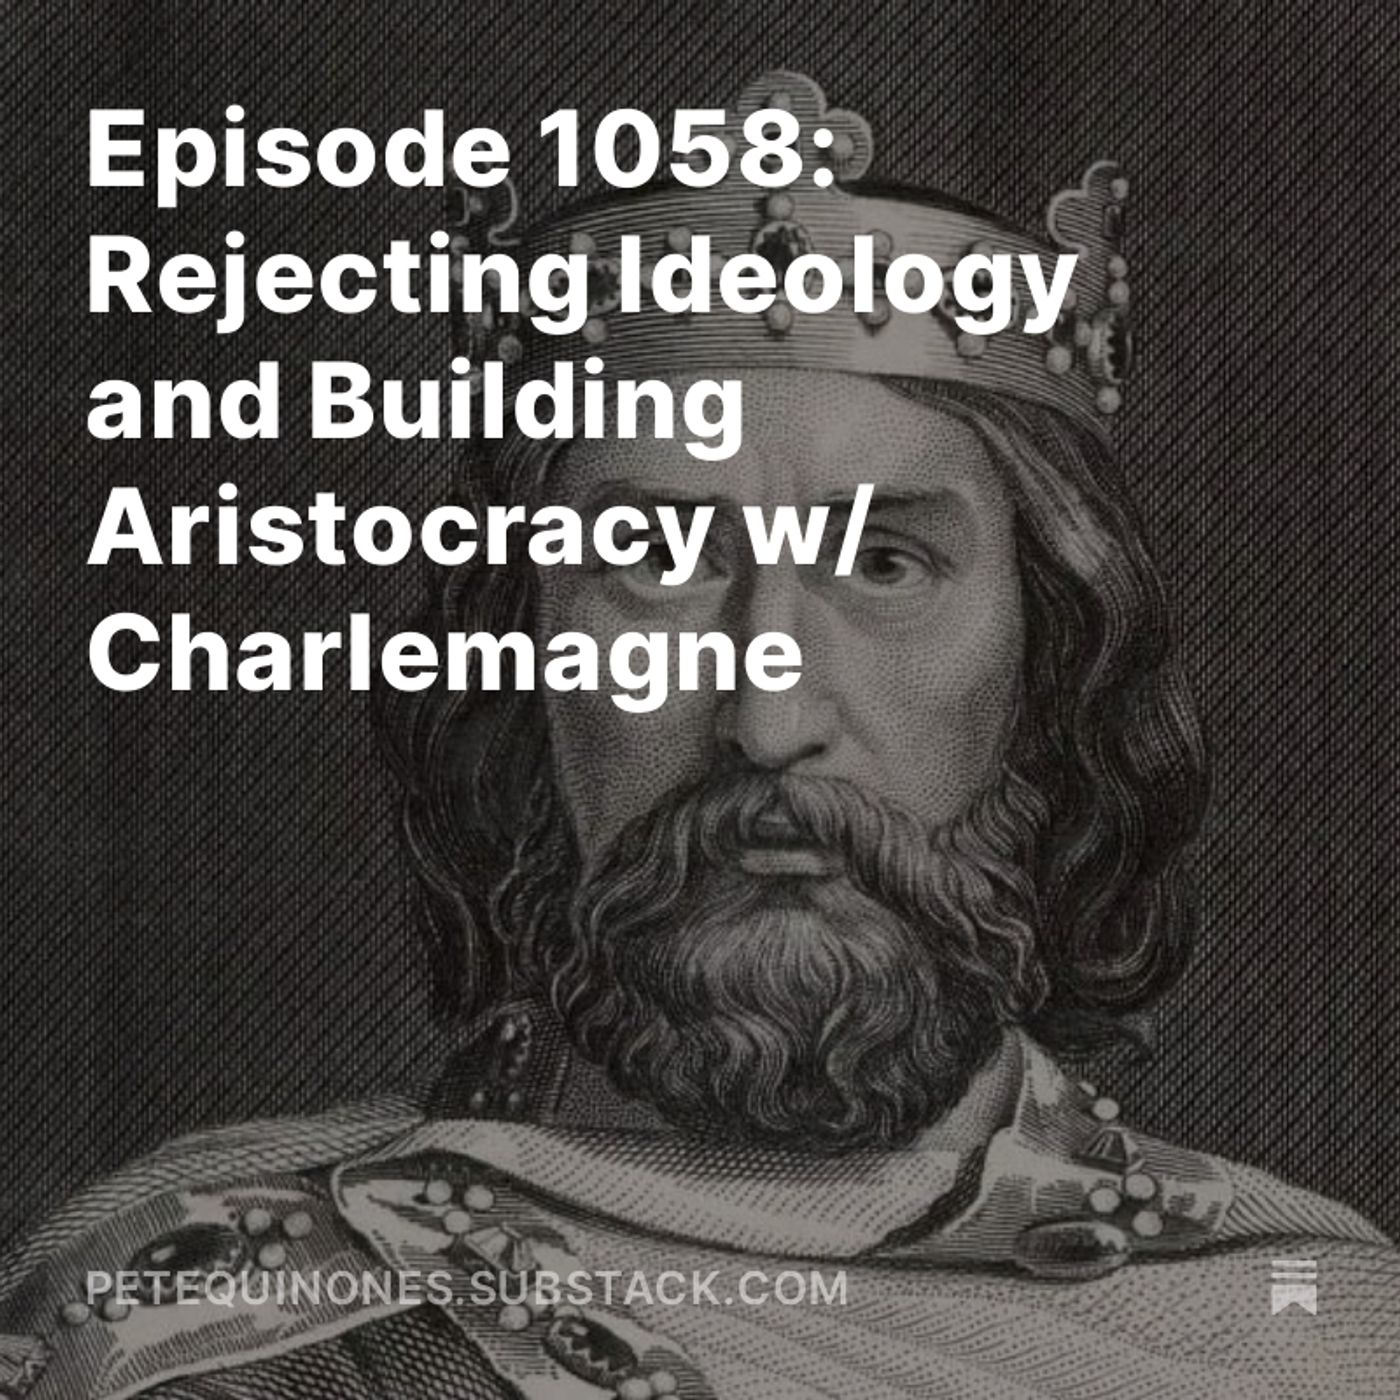 Episode 1058: Rejecting Ideology and Building Aristocracy w/ Charlemagne